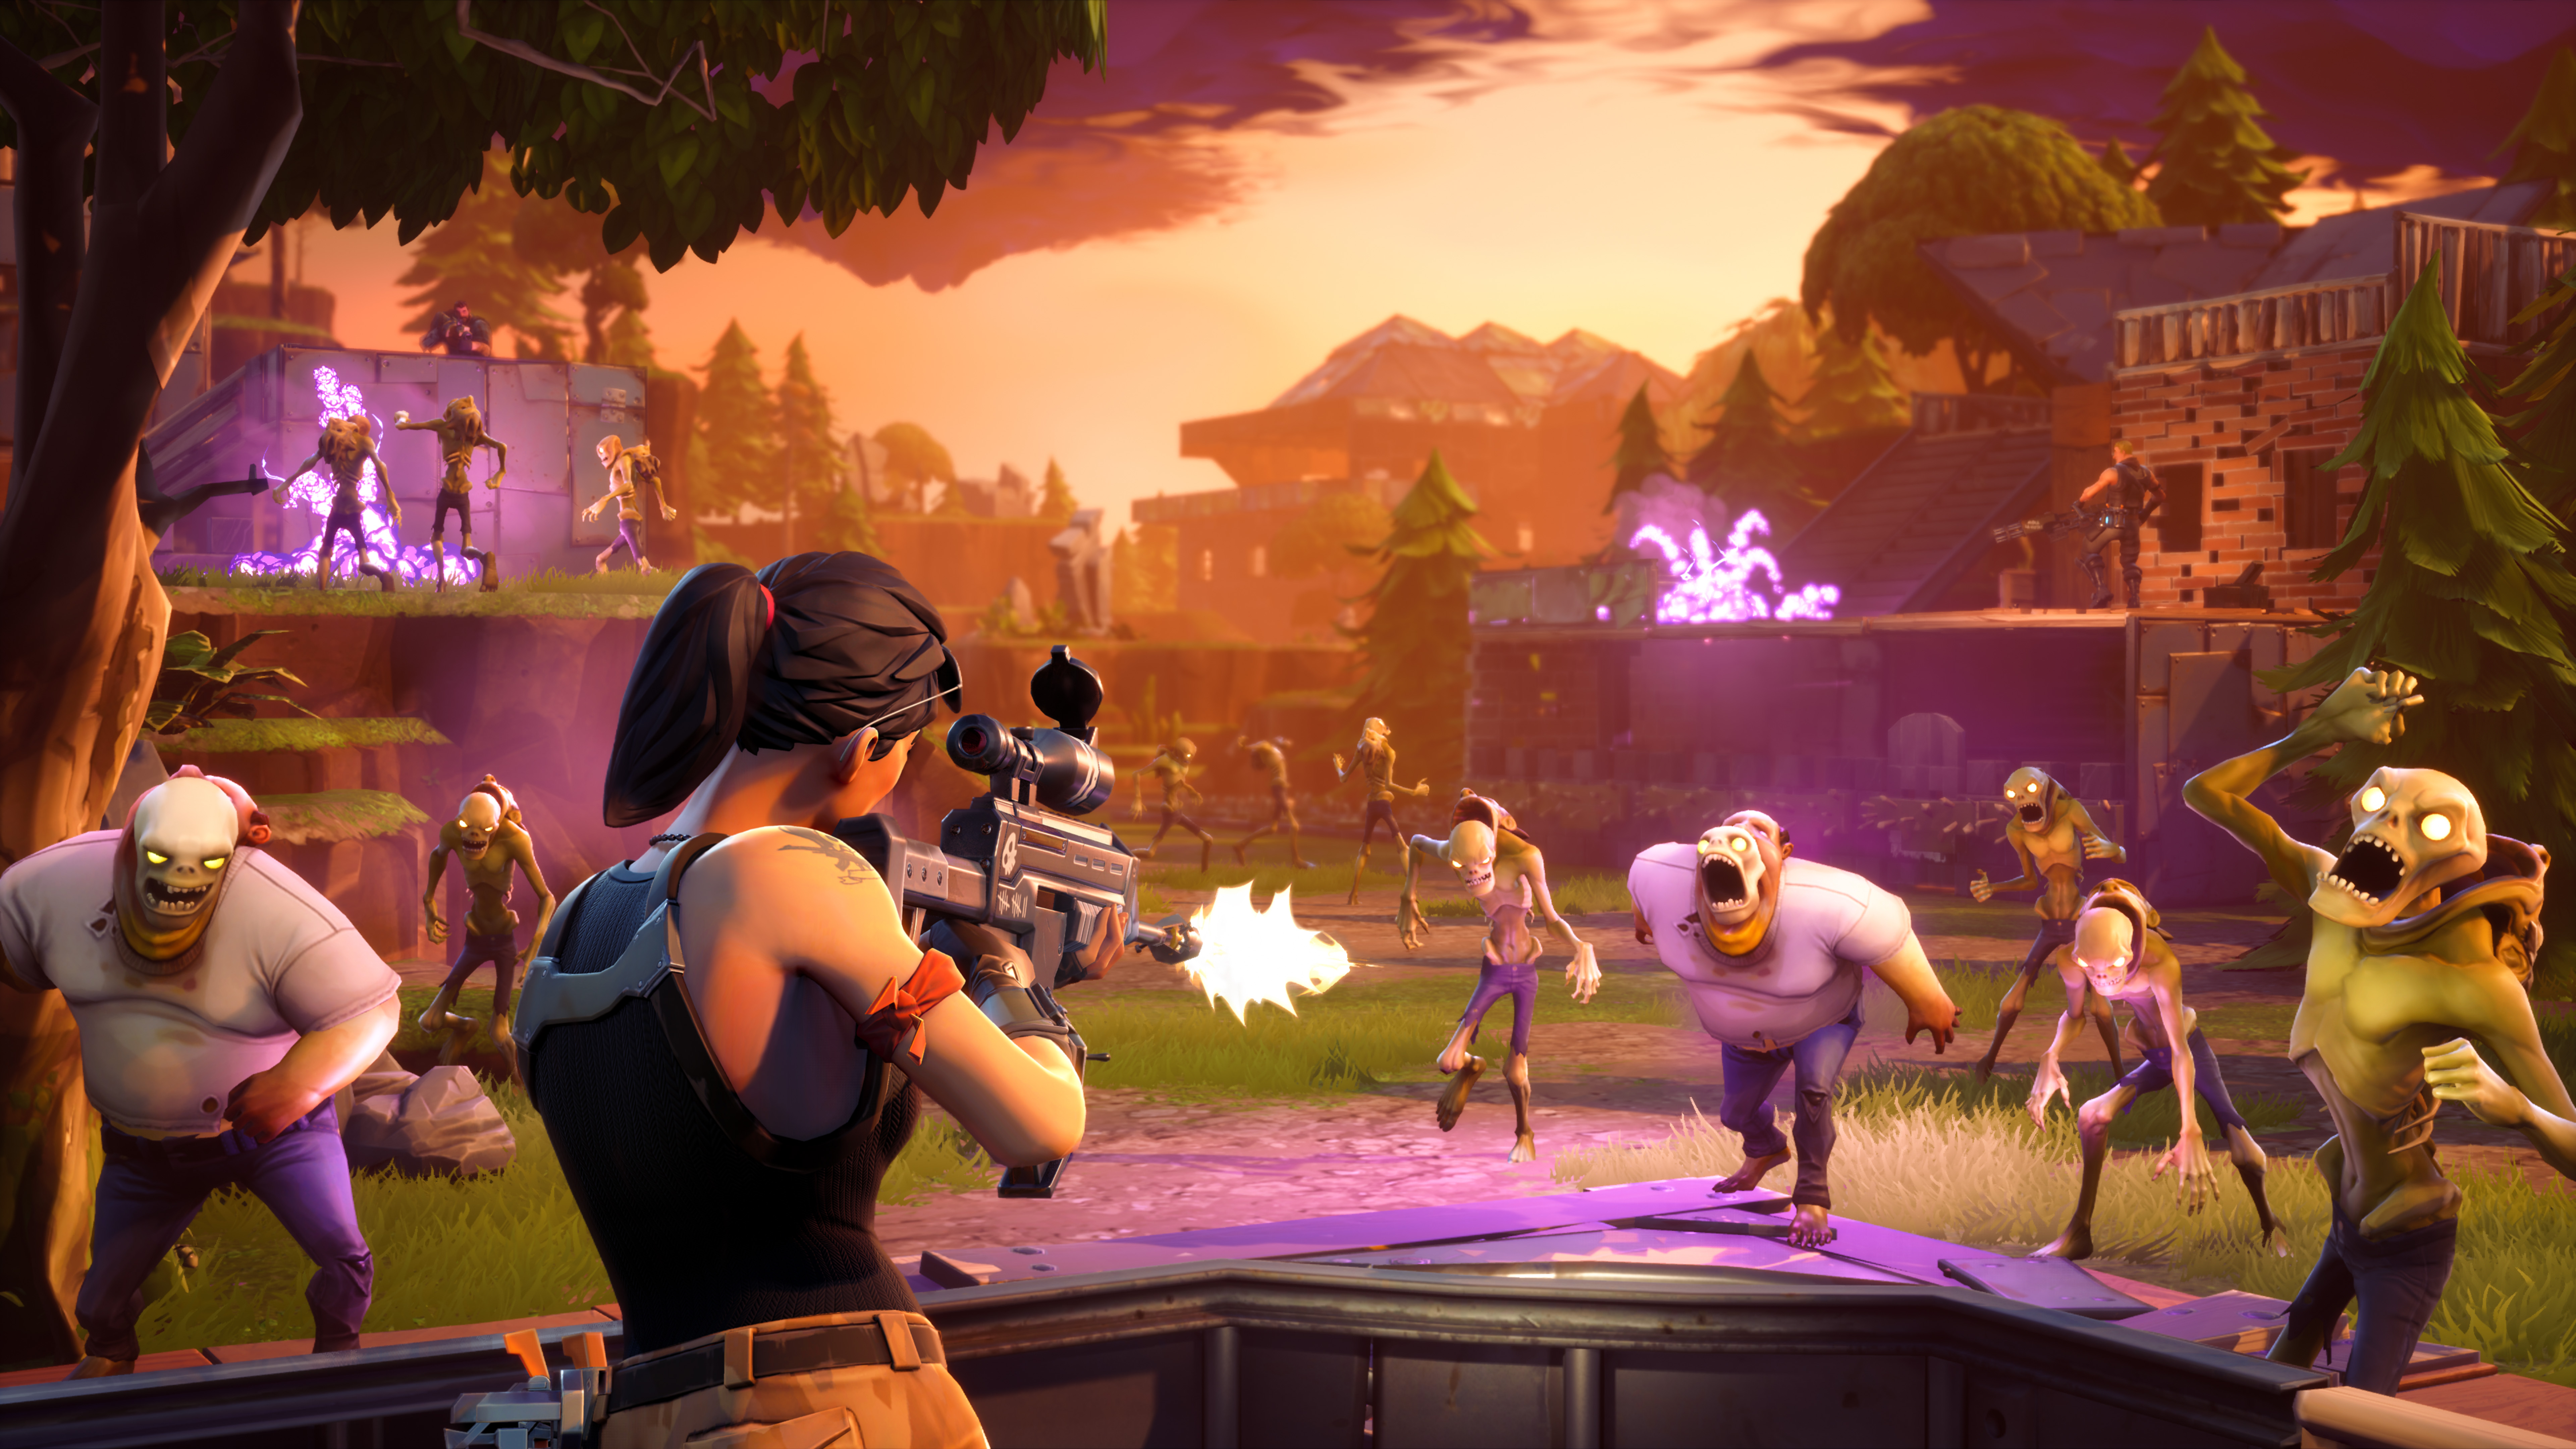 enlarge at its best fortnite looks and feels like this nicely staged promo pic of in game action however so many free to play annoyances drag this - what does dps mean in fortnite